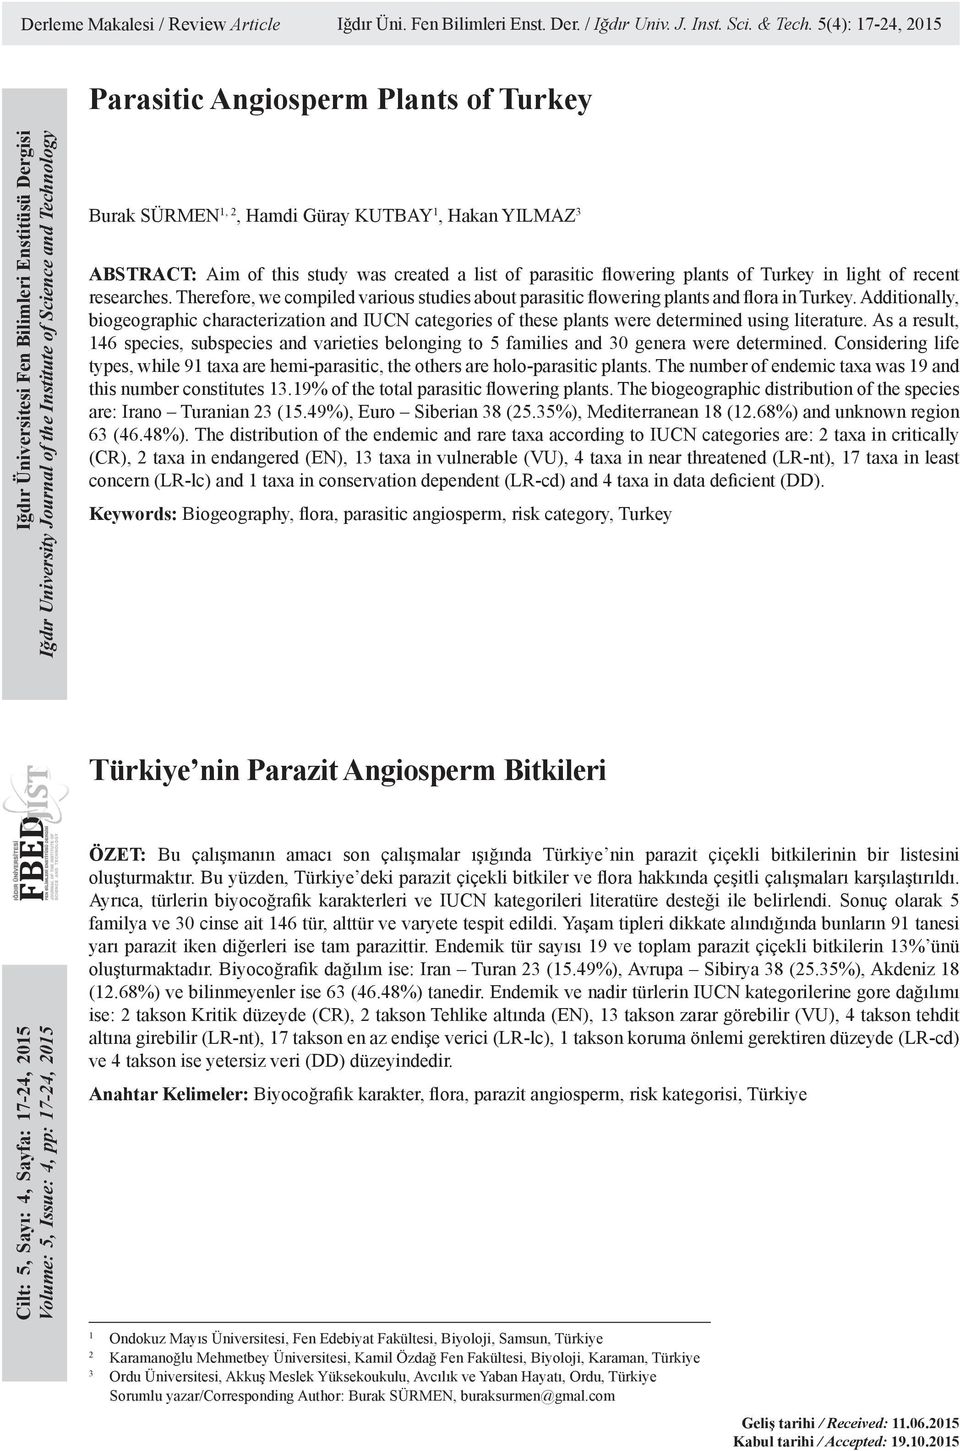 Güray KUTBAY 1, Hakan YILMAZ 3 ABSTRACT: Aim of this study was created a list of parasitic flowering plants of Turkey in light of recent researches.